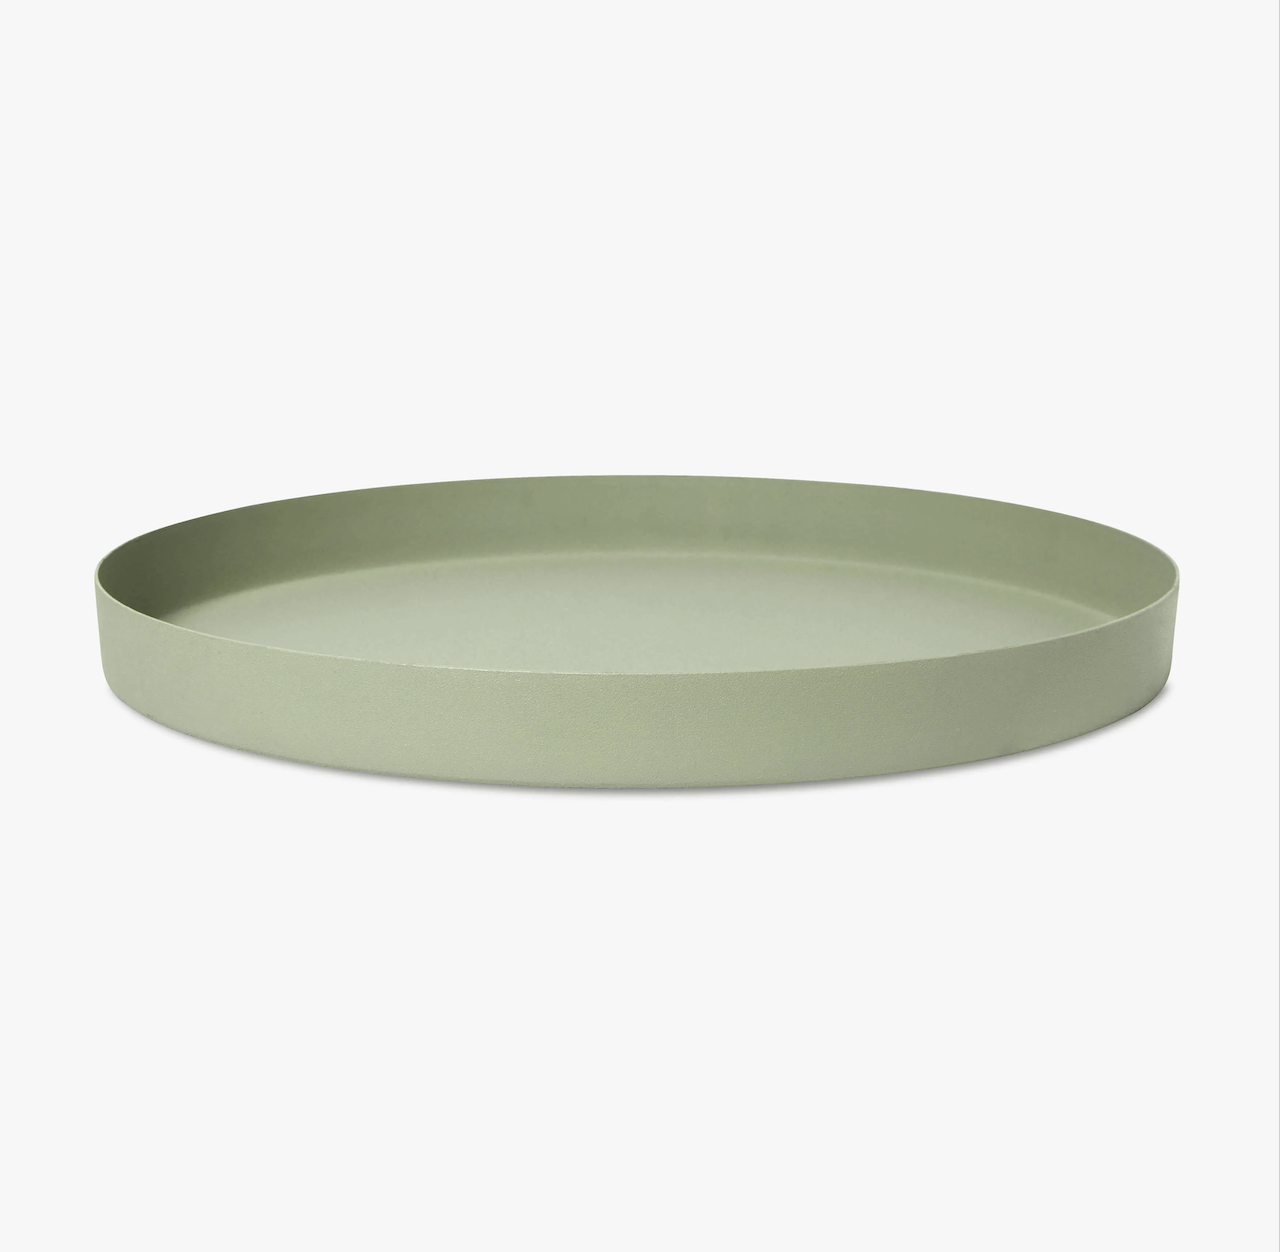 Mona Tray in Sage